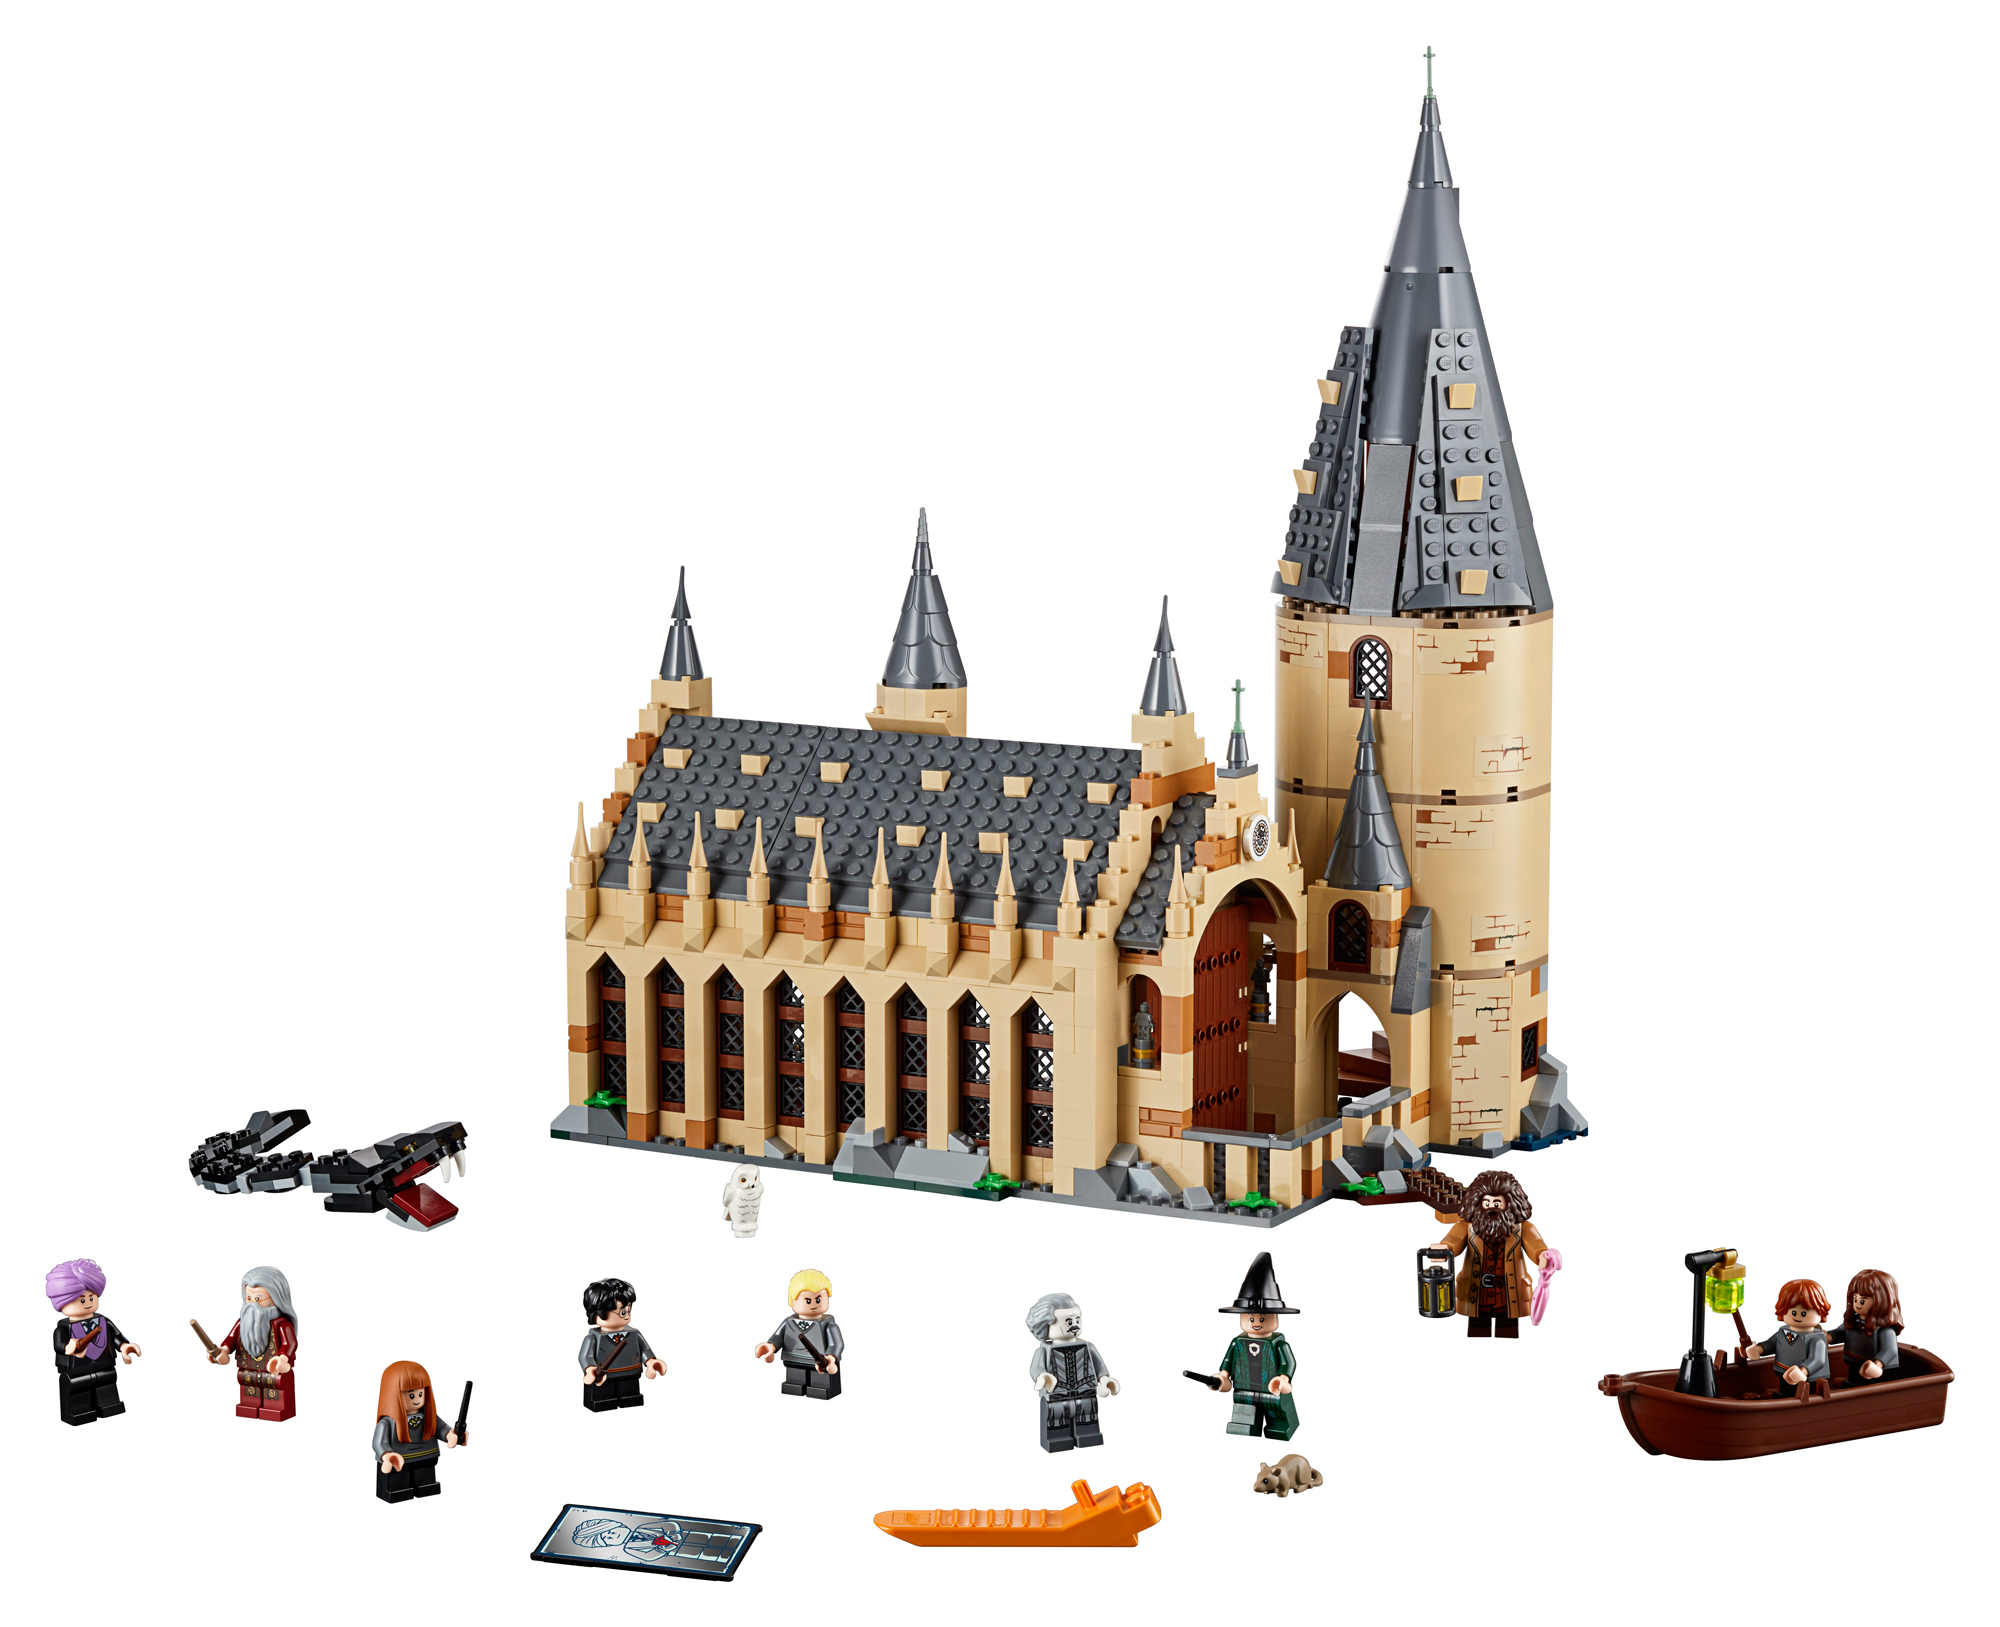 Lego’s New Hogwarts Great Hall Set Is Going To Magically Drain My Wallet